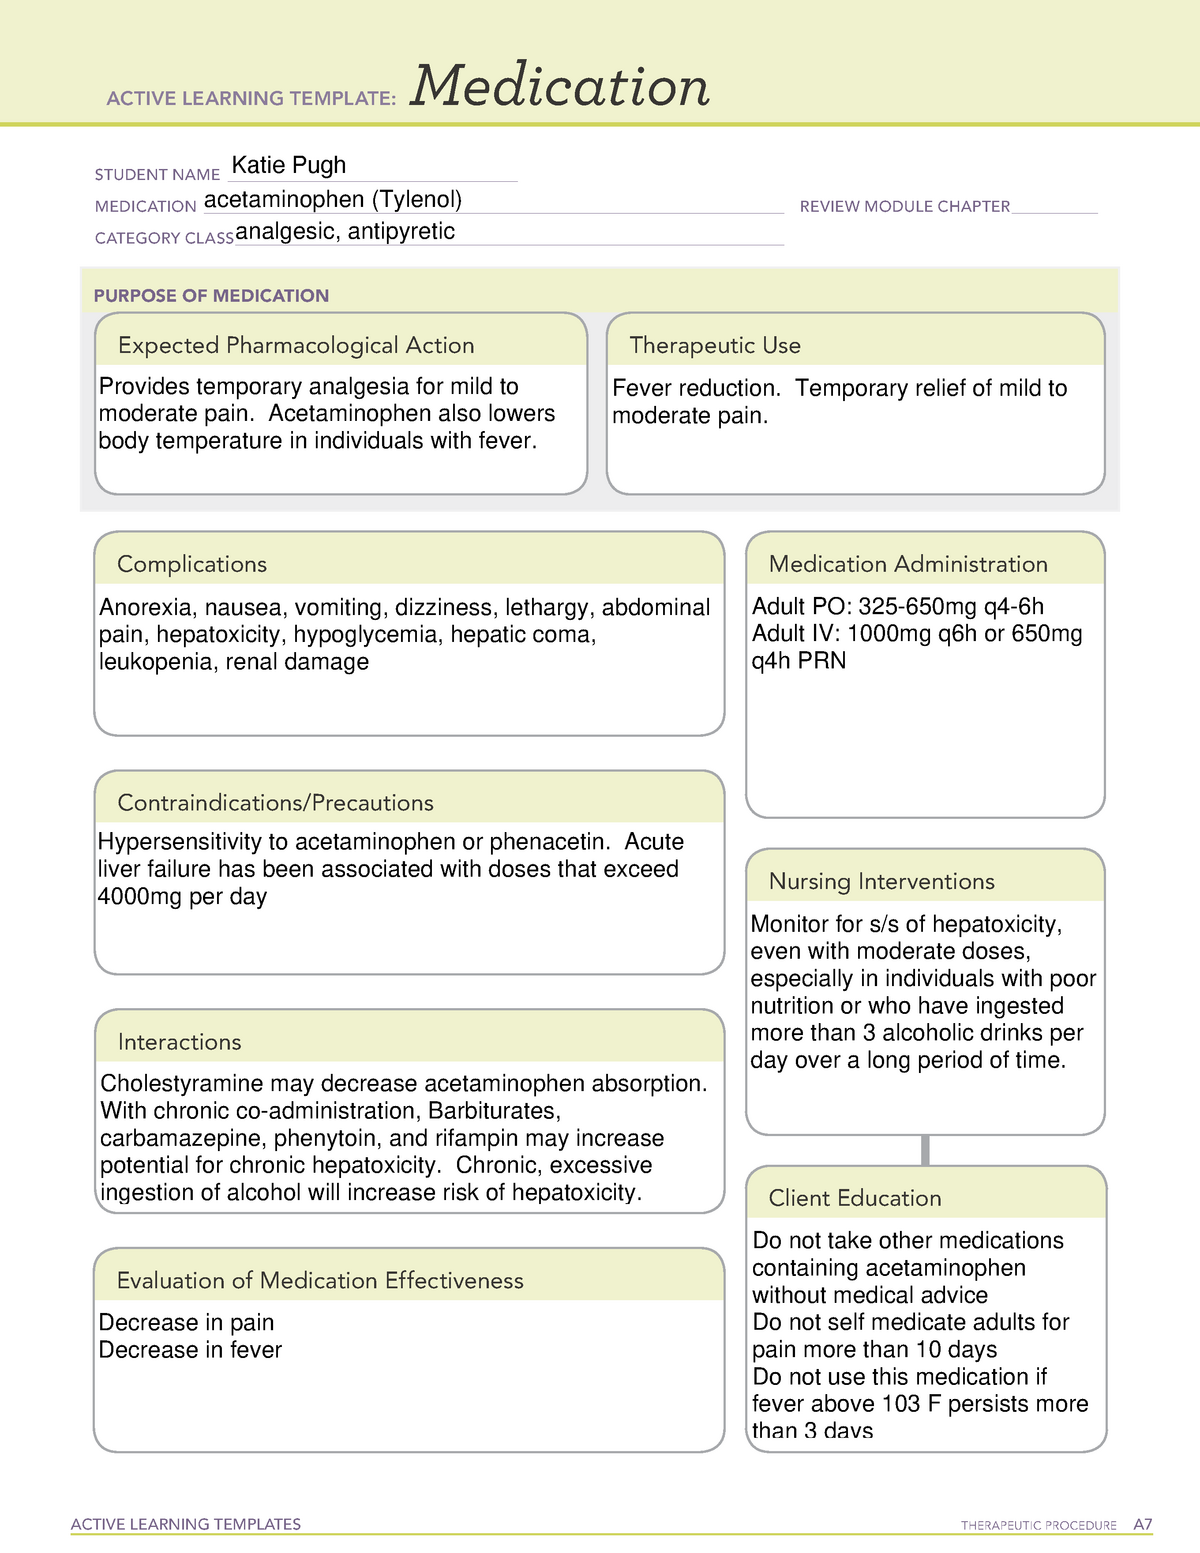 ATI Acetaminophen Active Learning Template ACTIVE LEARNING TEMPLATES